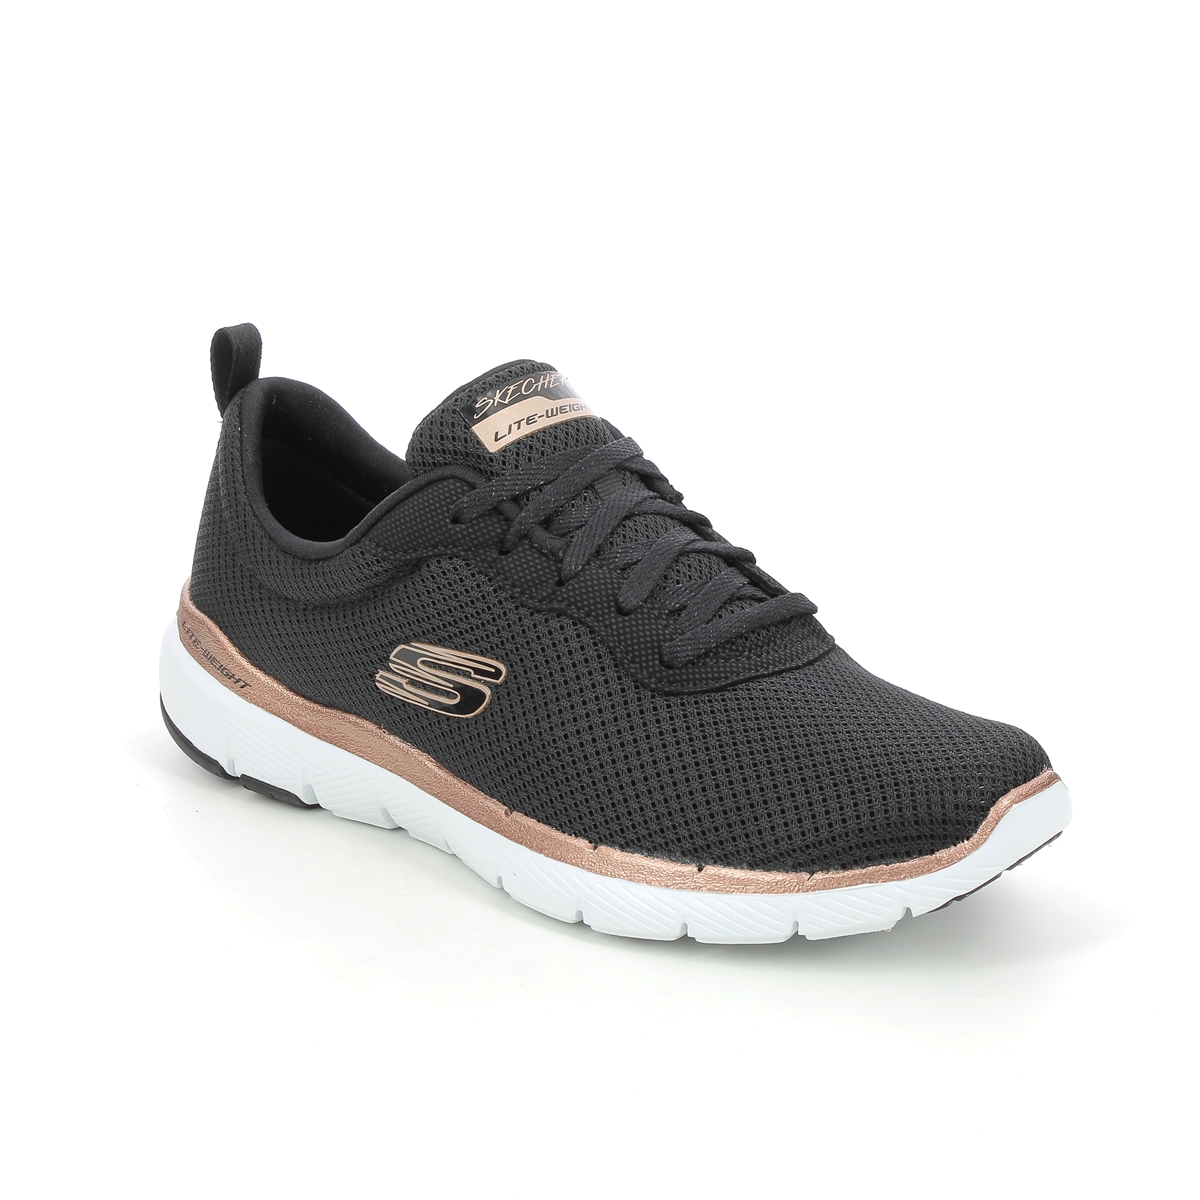 Skechers First Insight Black Rose Gold Womens Trainers 13070 In Size 6 In Plain Black Rose Gold